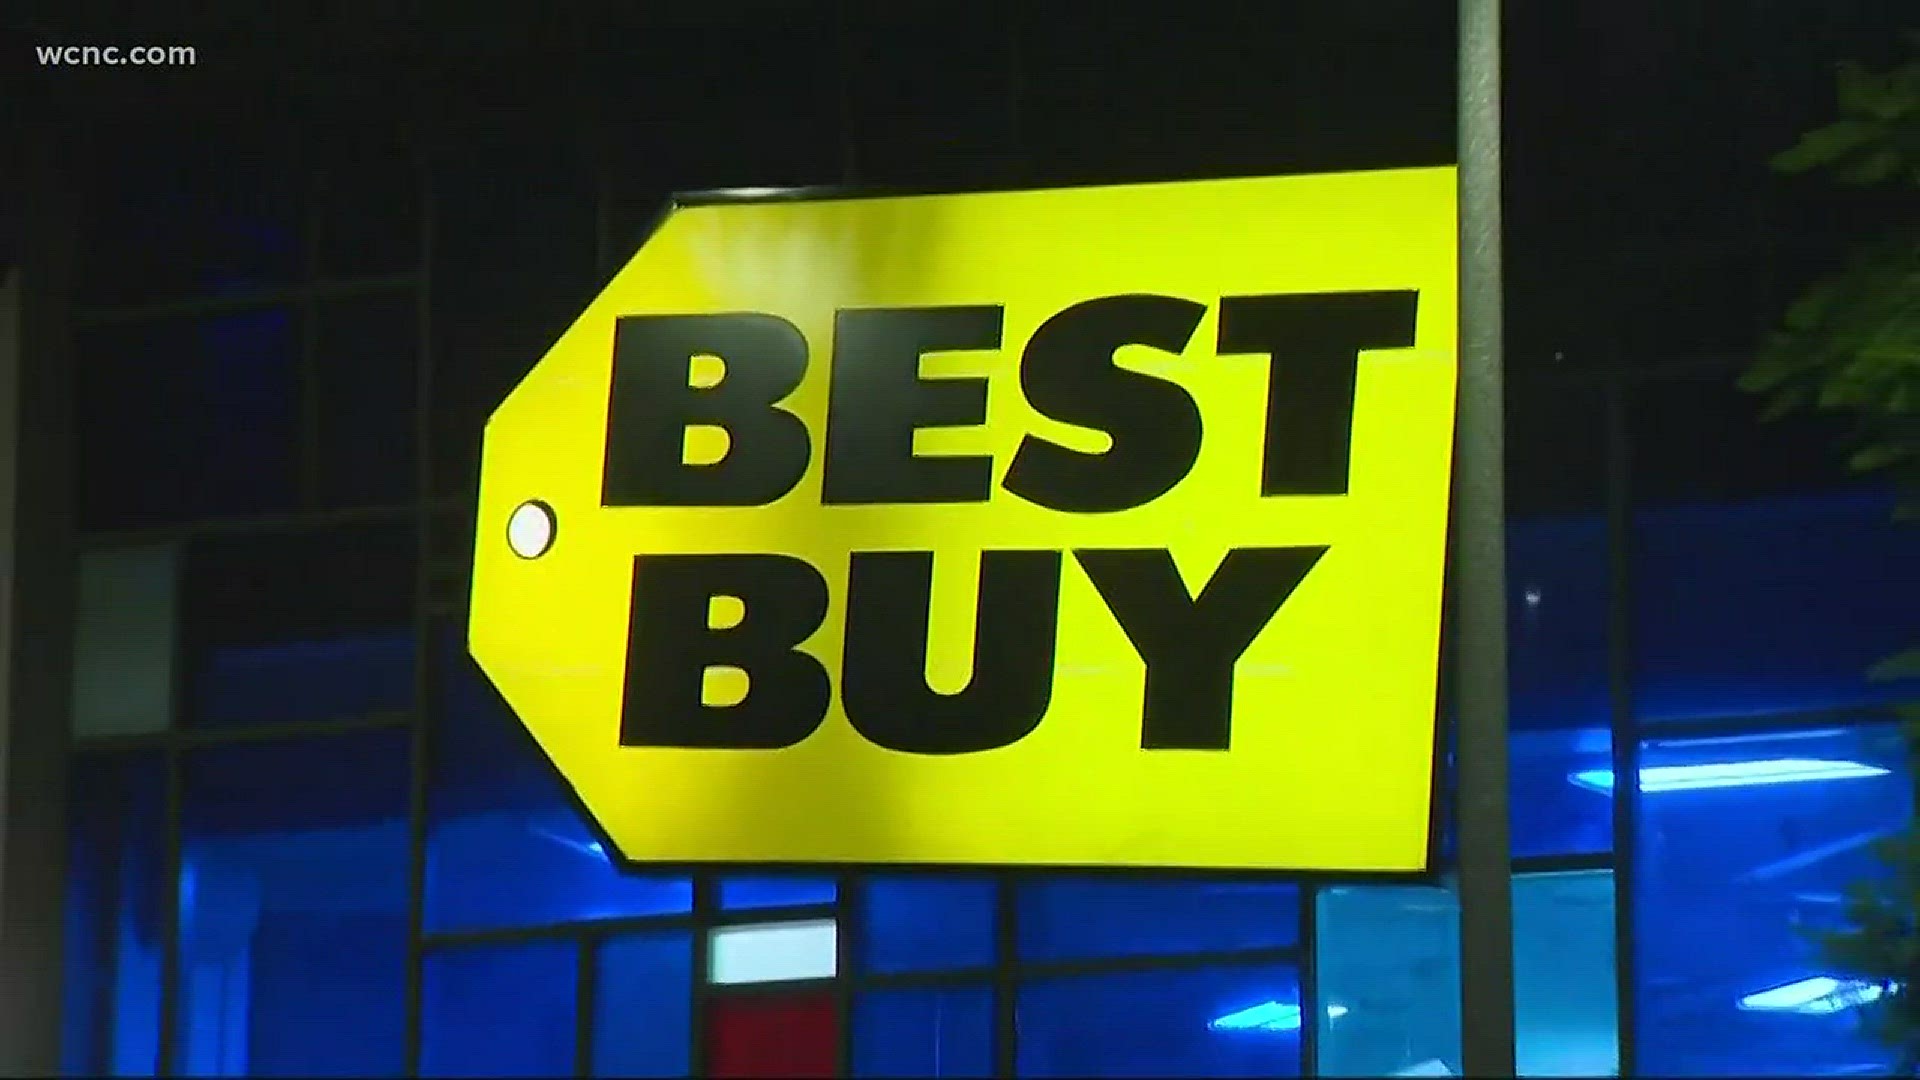 Retailer Best Buy announced that it will stop selling CDs this summer.